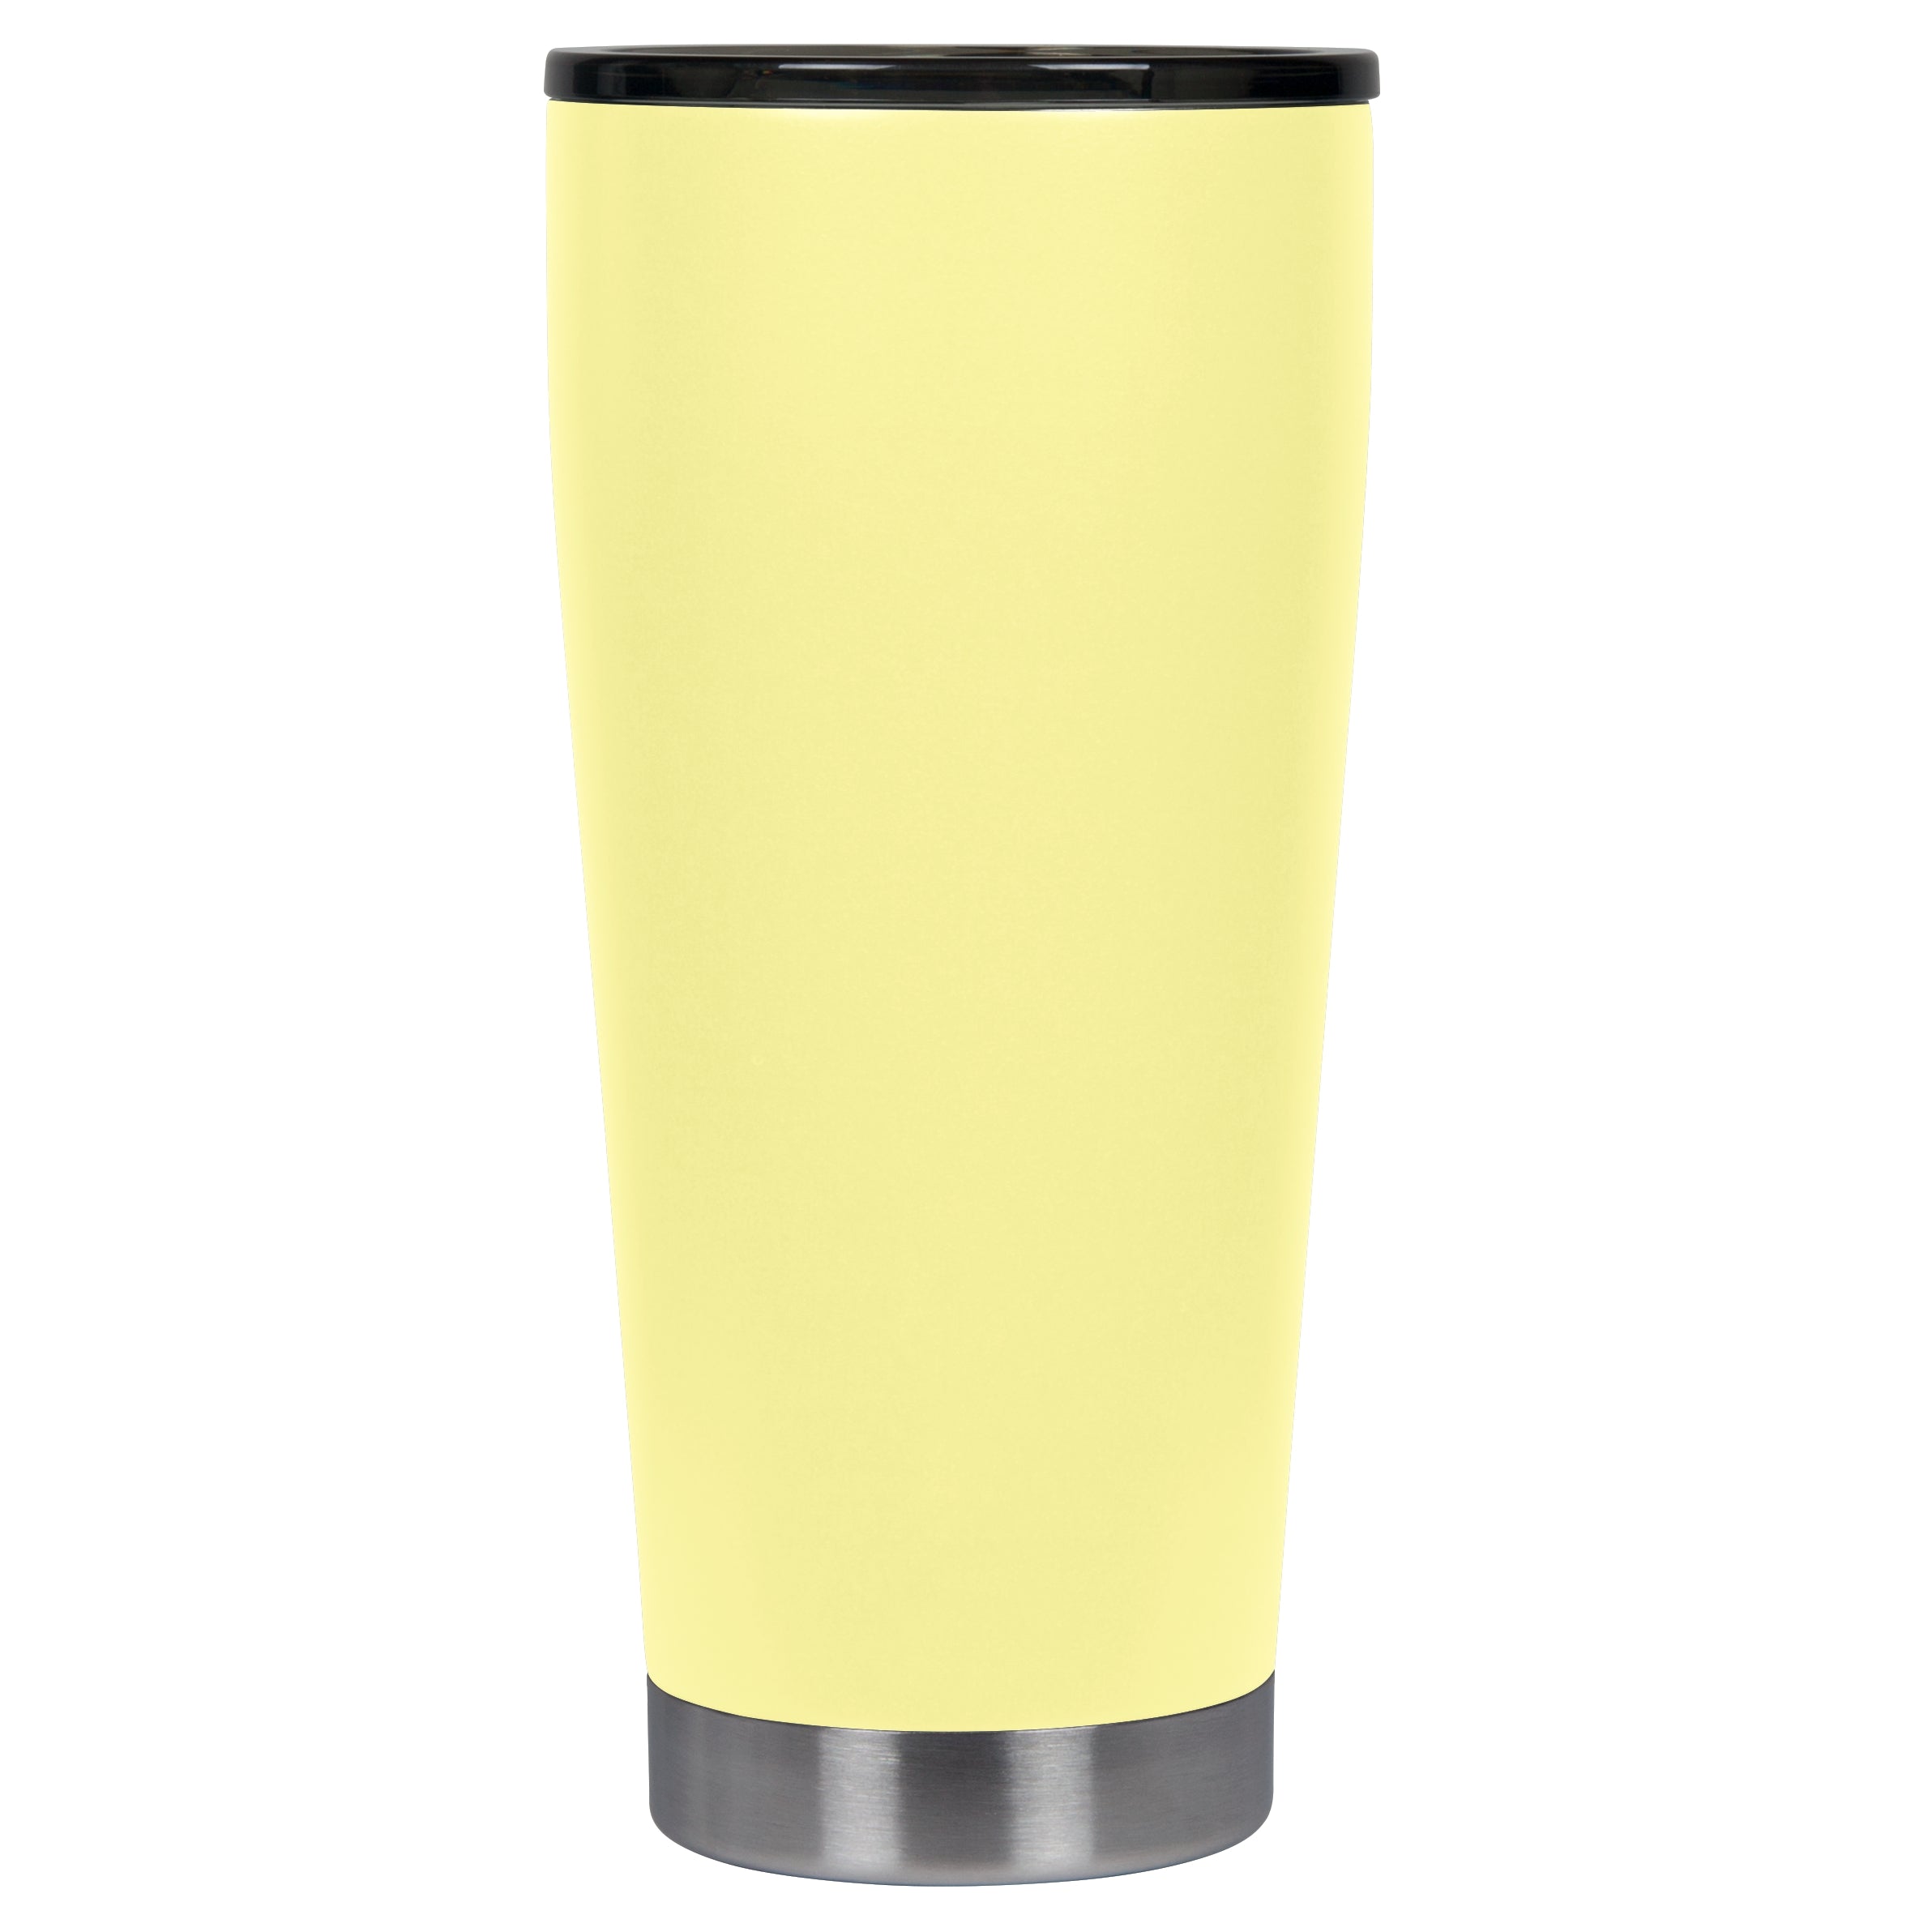 Beautiful Black Woman - 20oz Tumbler with straw and lid – T's